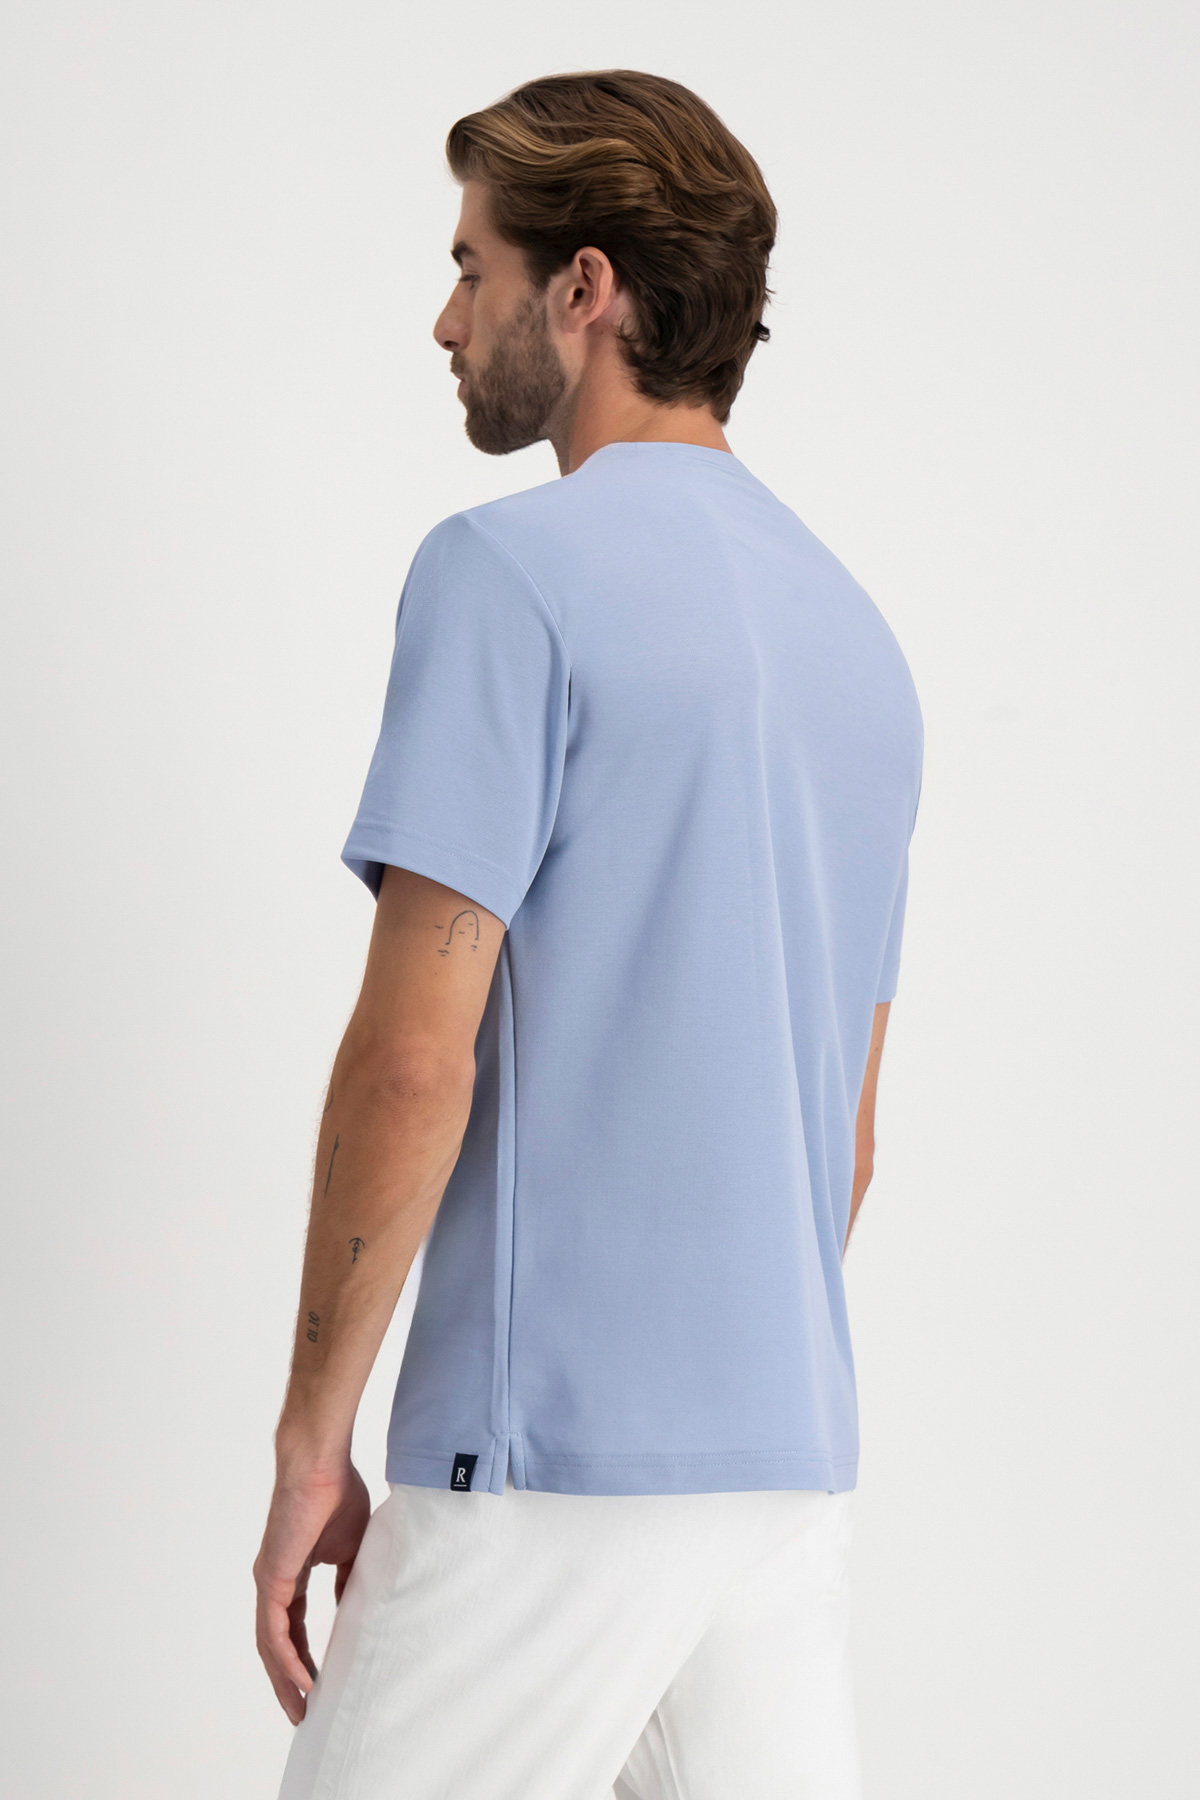 Playera EASY CARE TECHNOLOGY Roberts Color Azul Claro Contemporary Fit